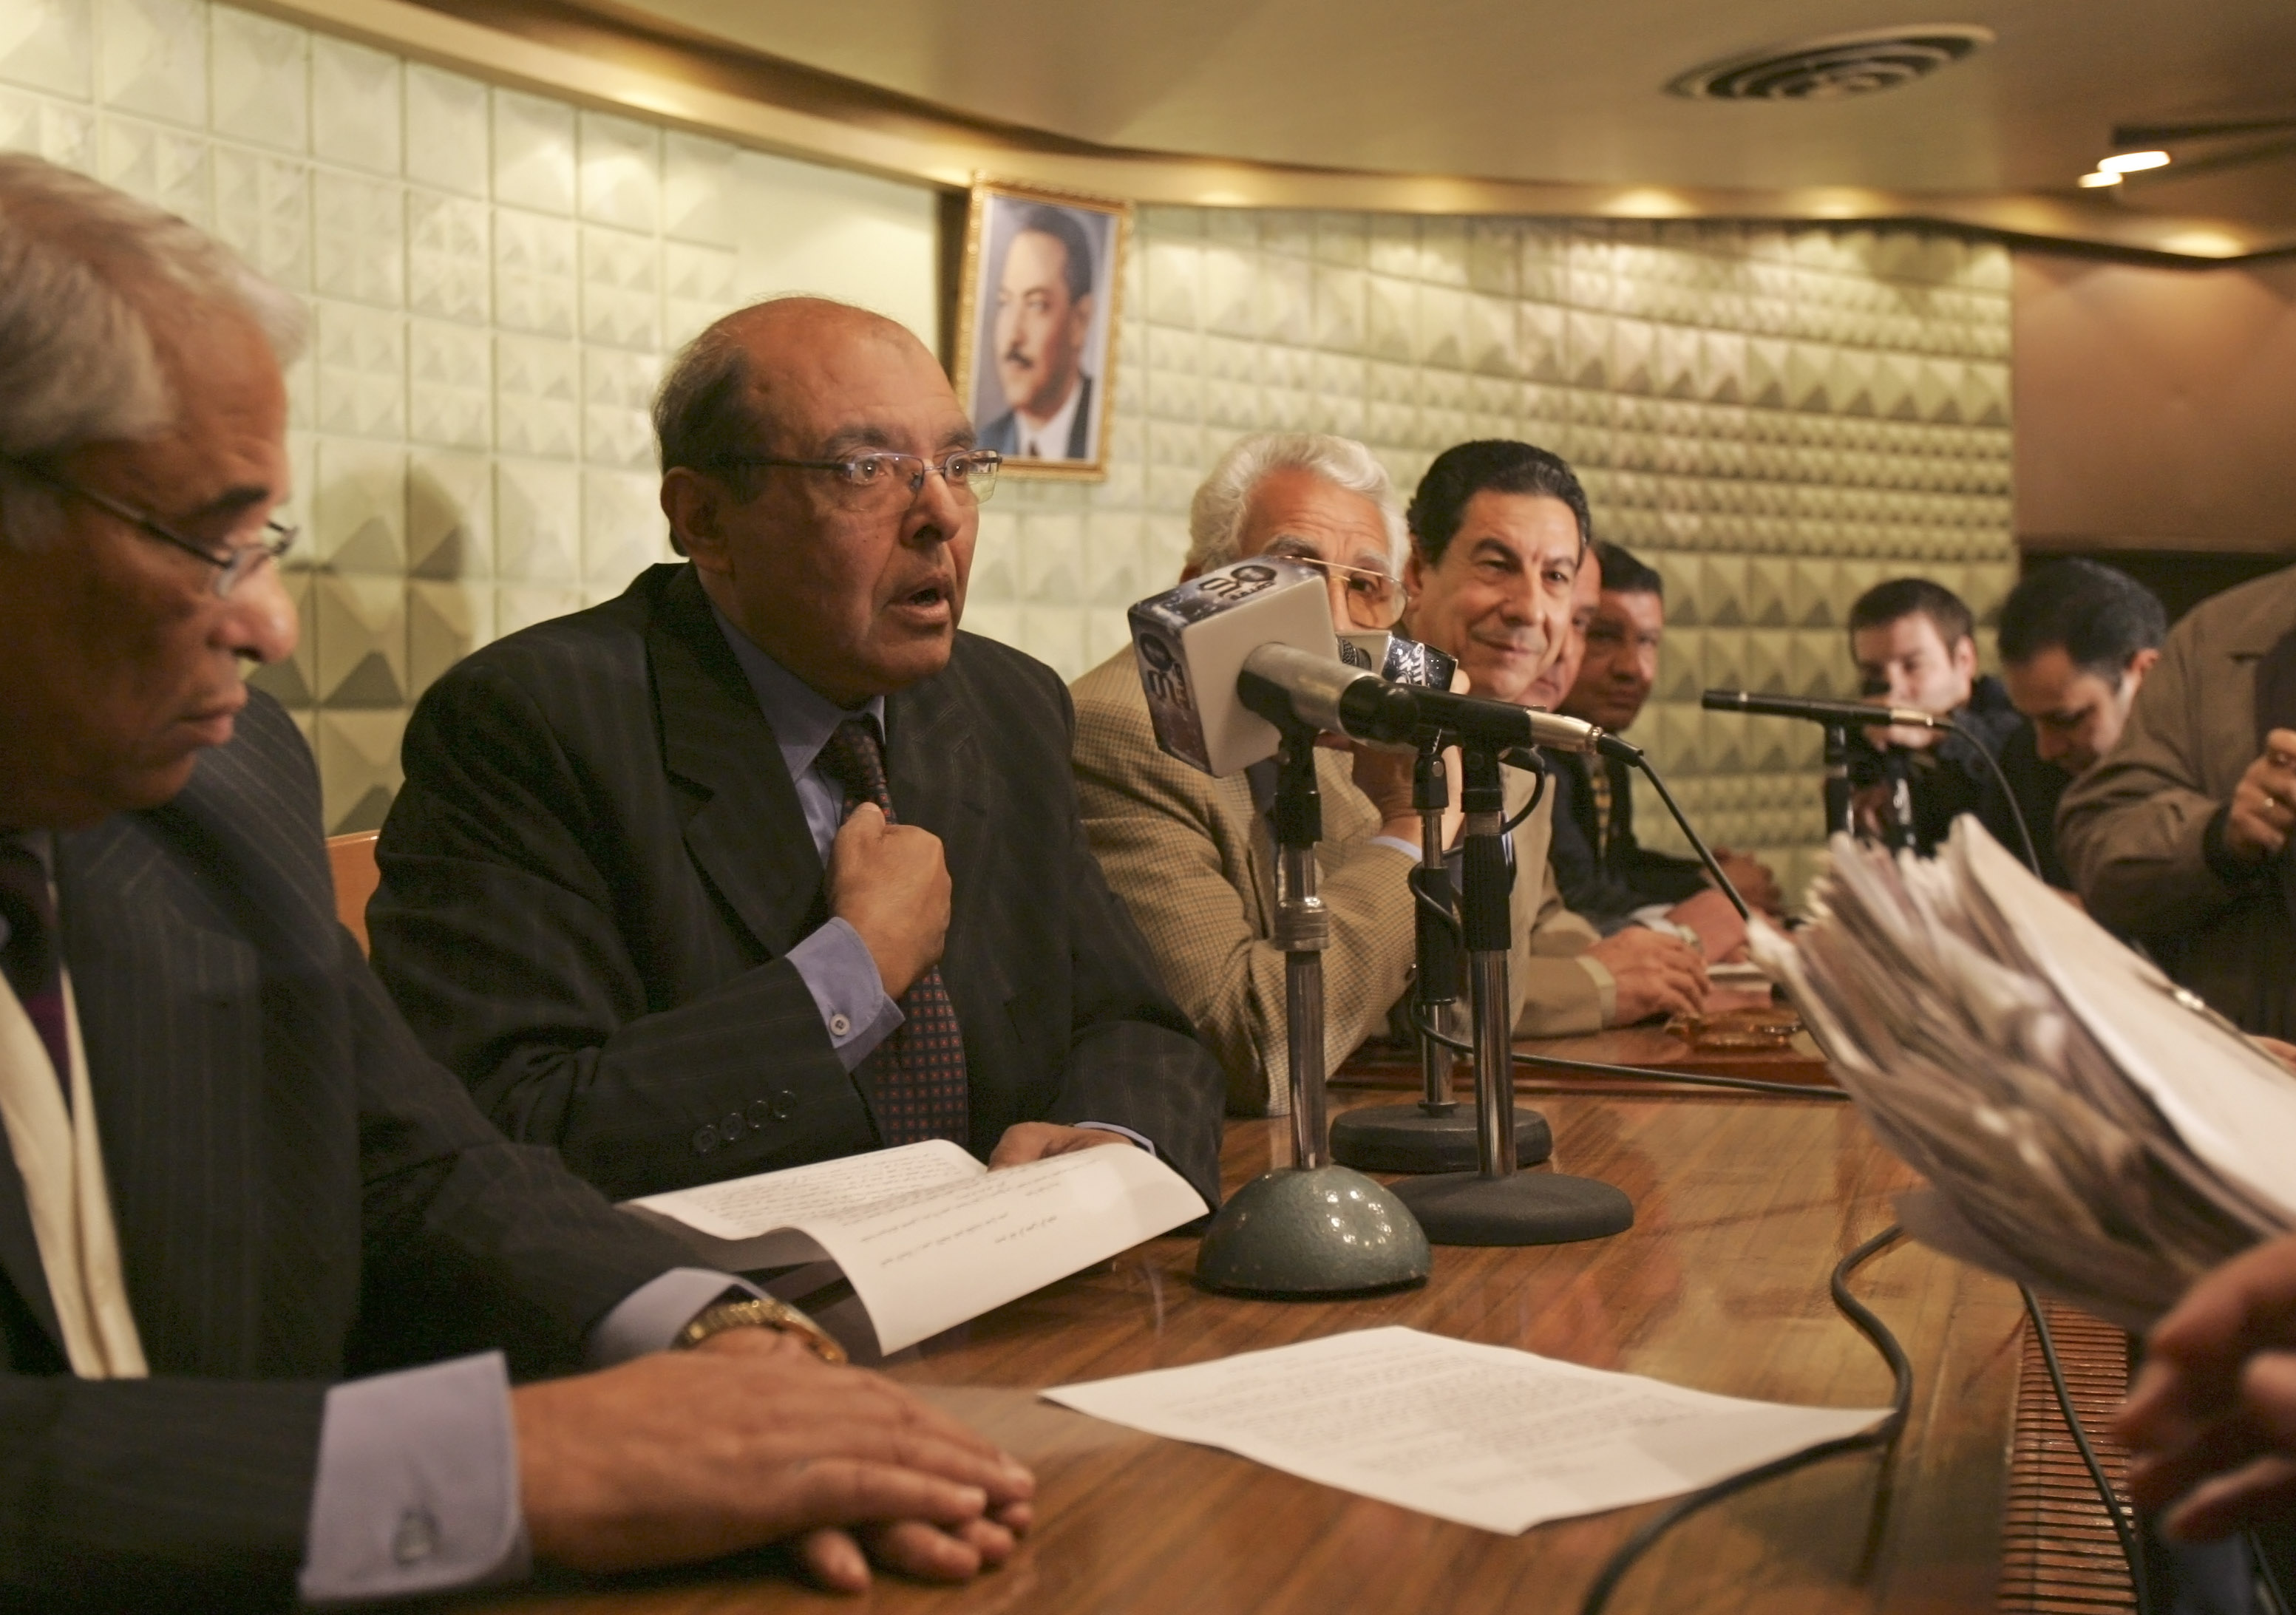 Photo by Tara Todras-Whitehill, of Sa'eed el-Gohari and other NDP-affiliated Union officials, in a dialogue with the Mahalla workers